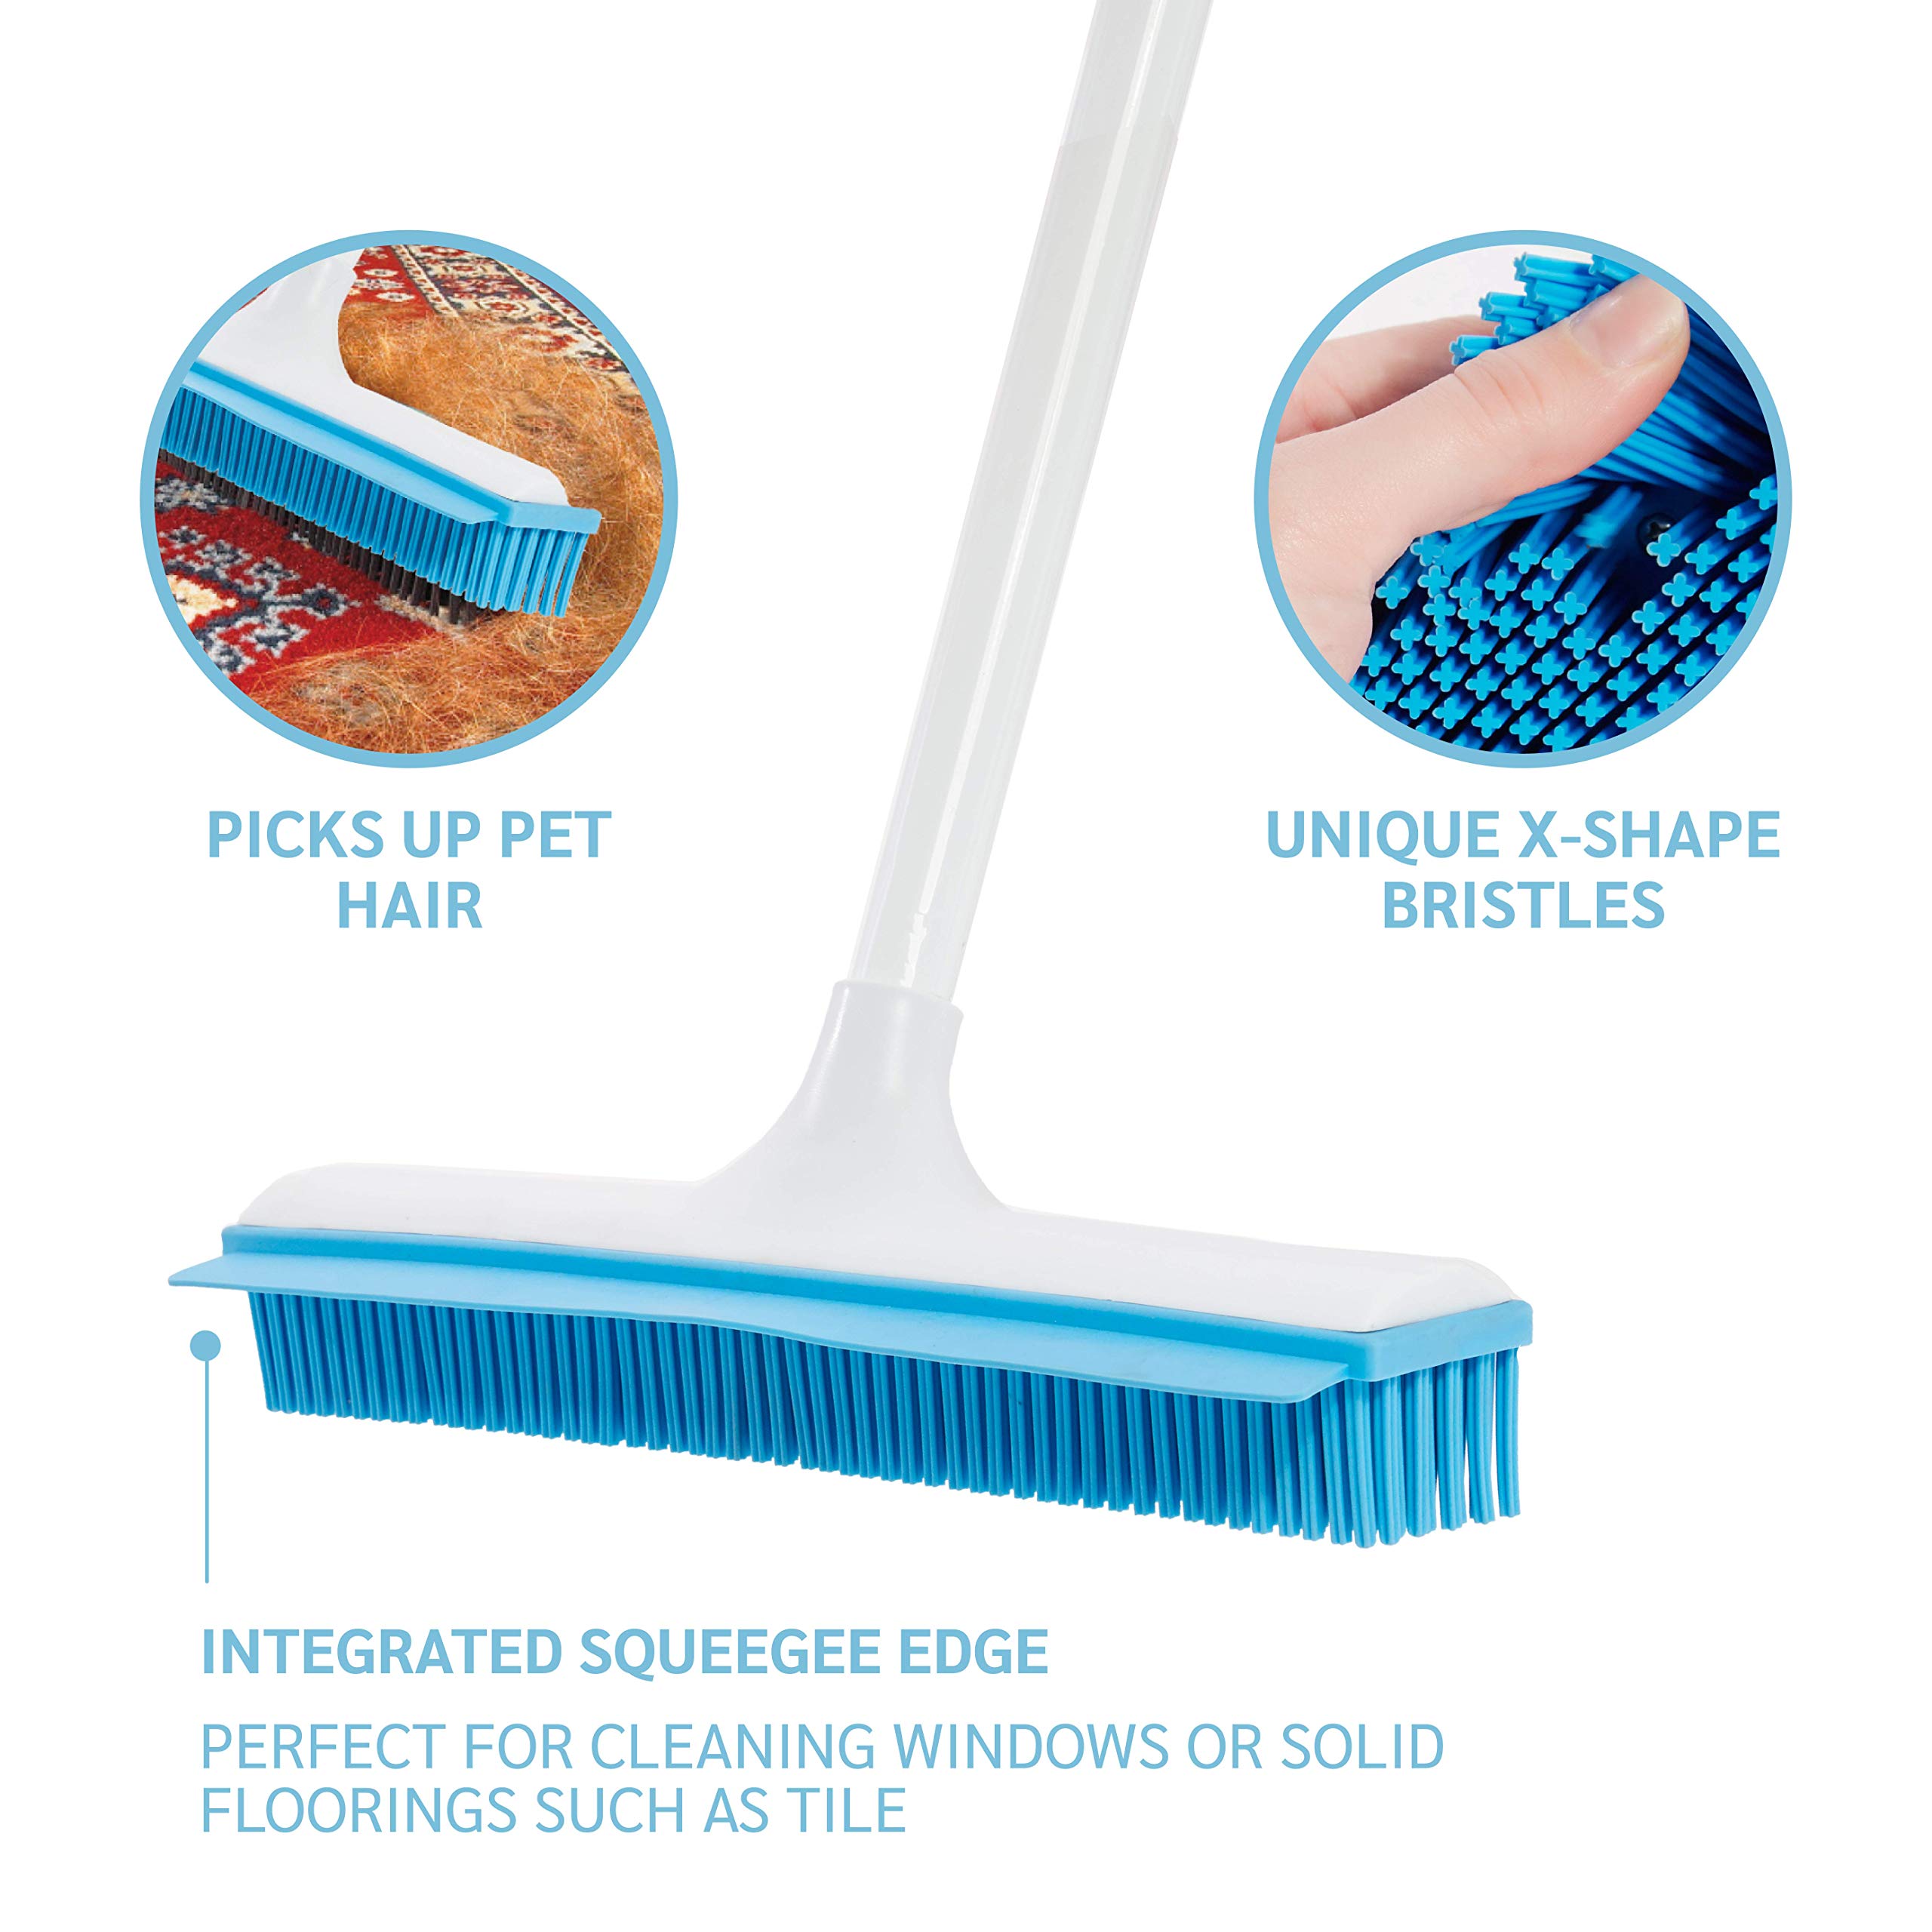 X-Broom- All Purpose Rubber Bristle Carpet Broom with Full-Length Squeegee to Remove Pet Hair, Dust, Dirt, Water